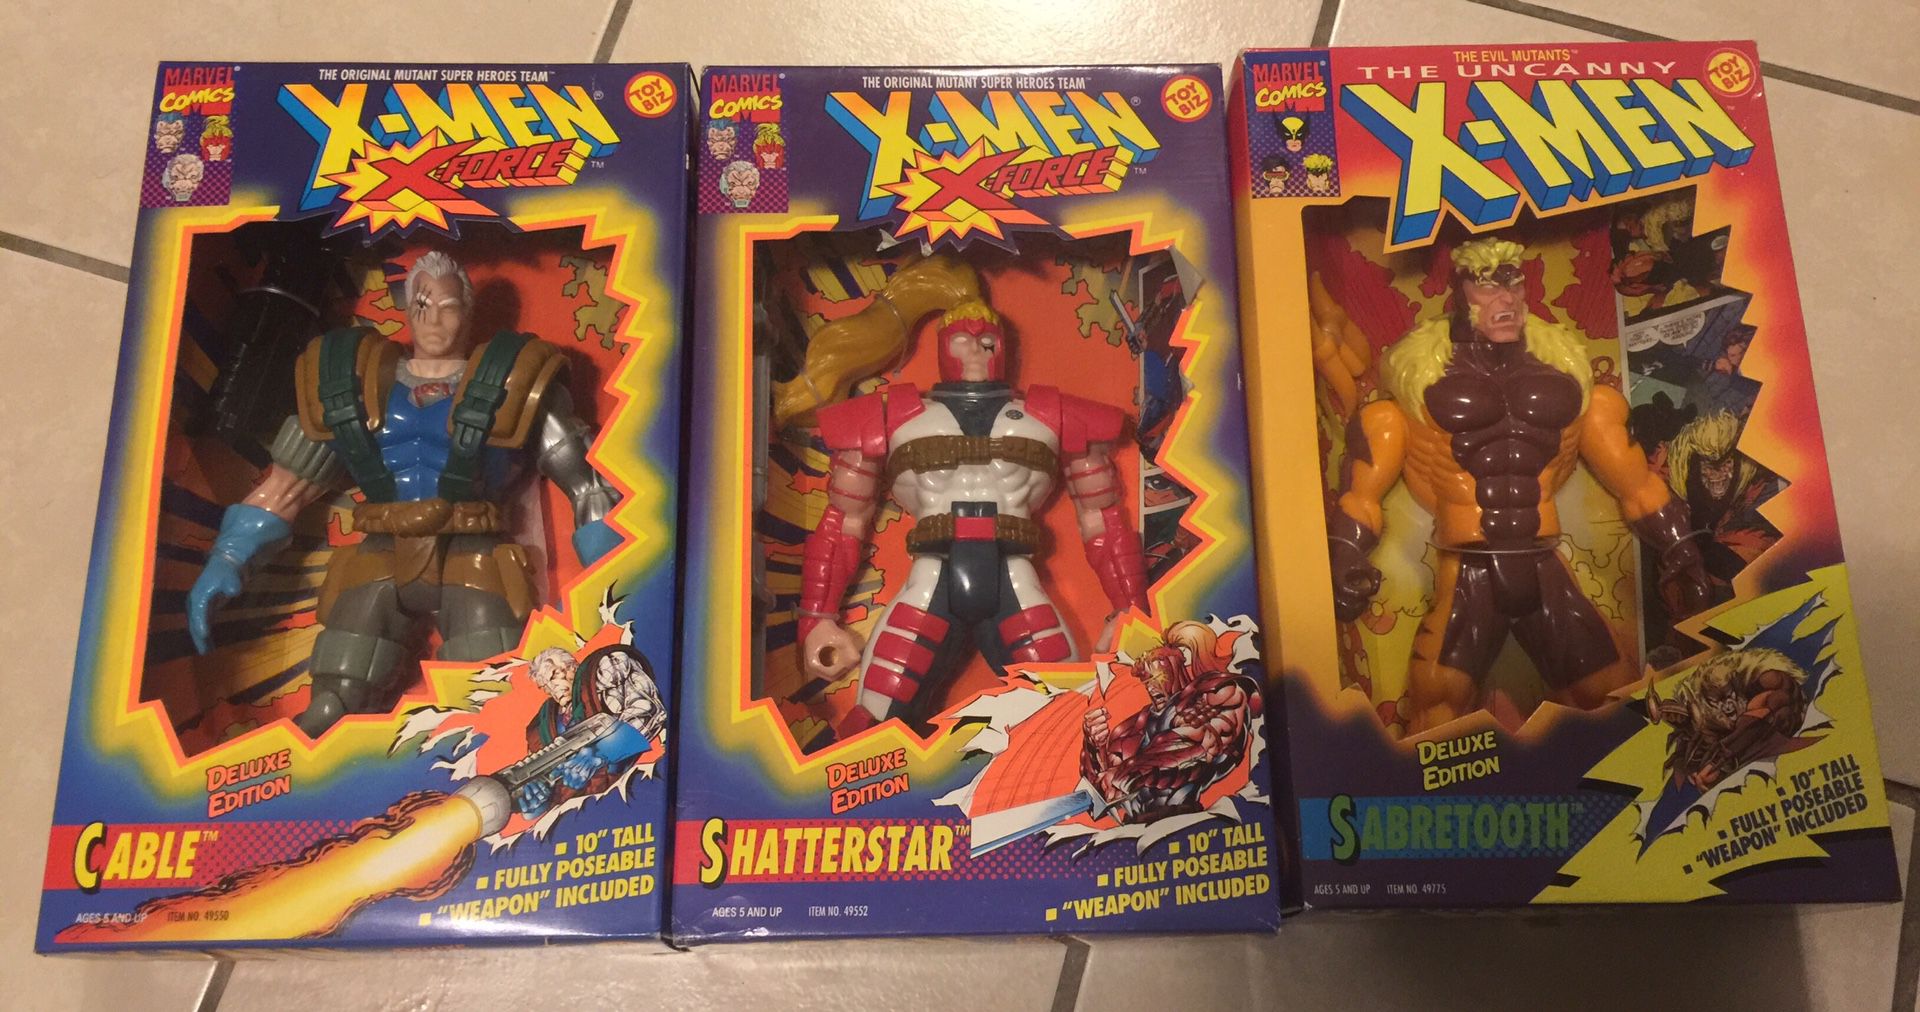 Vintage 1993 Toy Biz Deluxe 10 inch Toy Action Figure Marvel Comics X-Men Cable Shatterstar Sabretooth MIB Comic Book